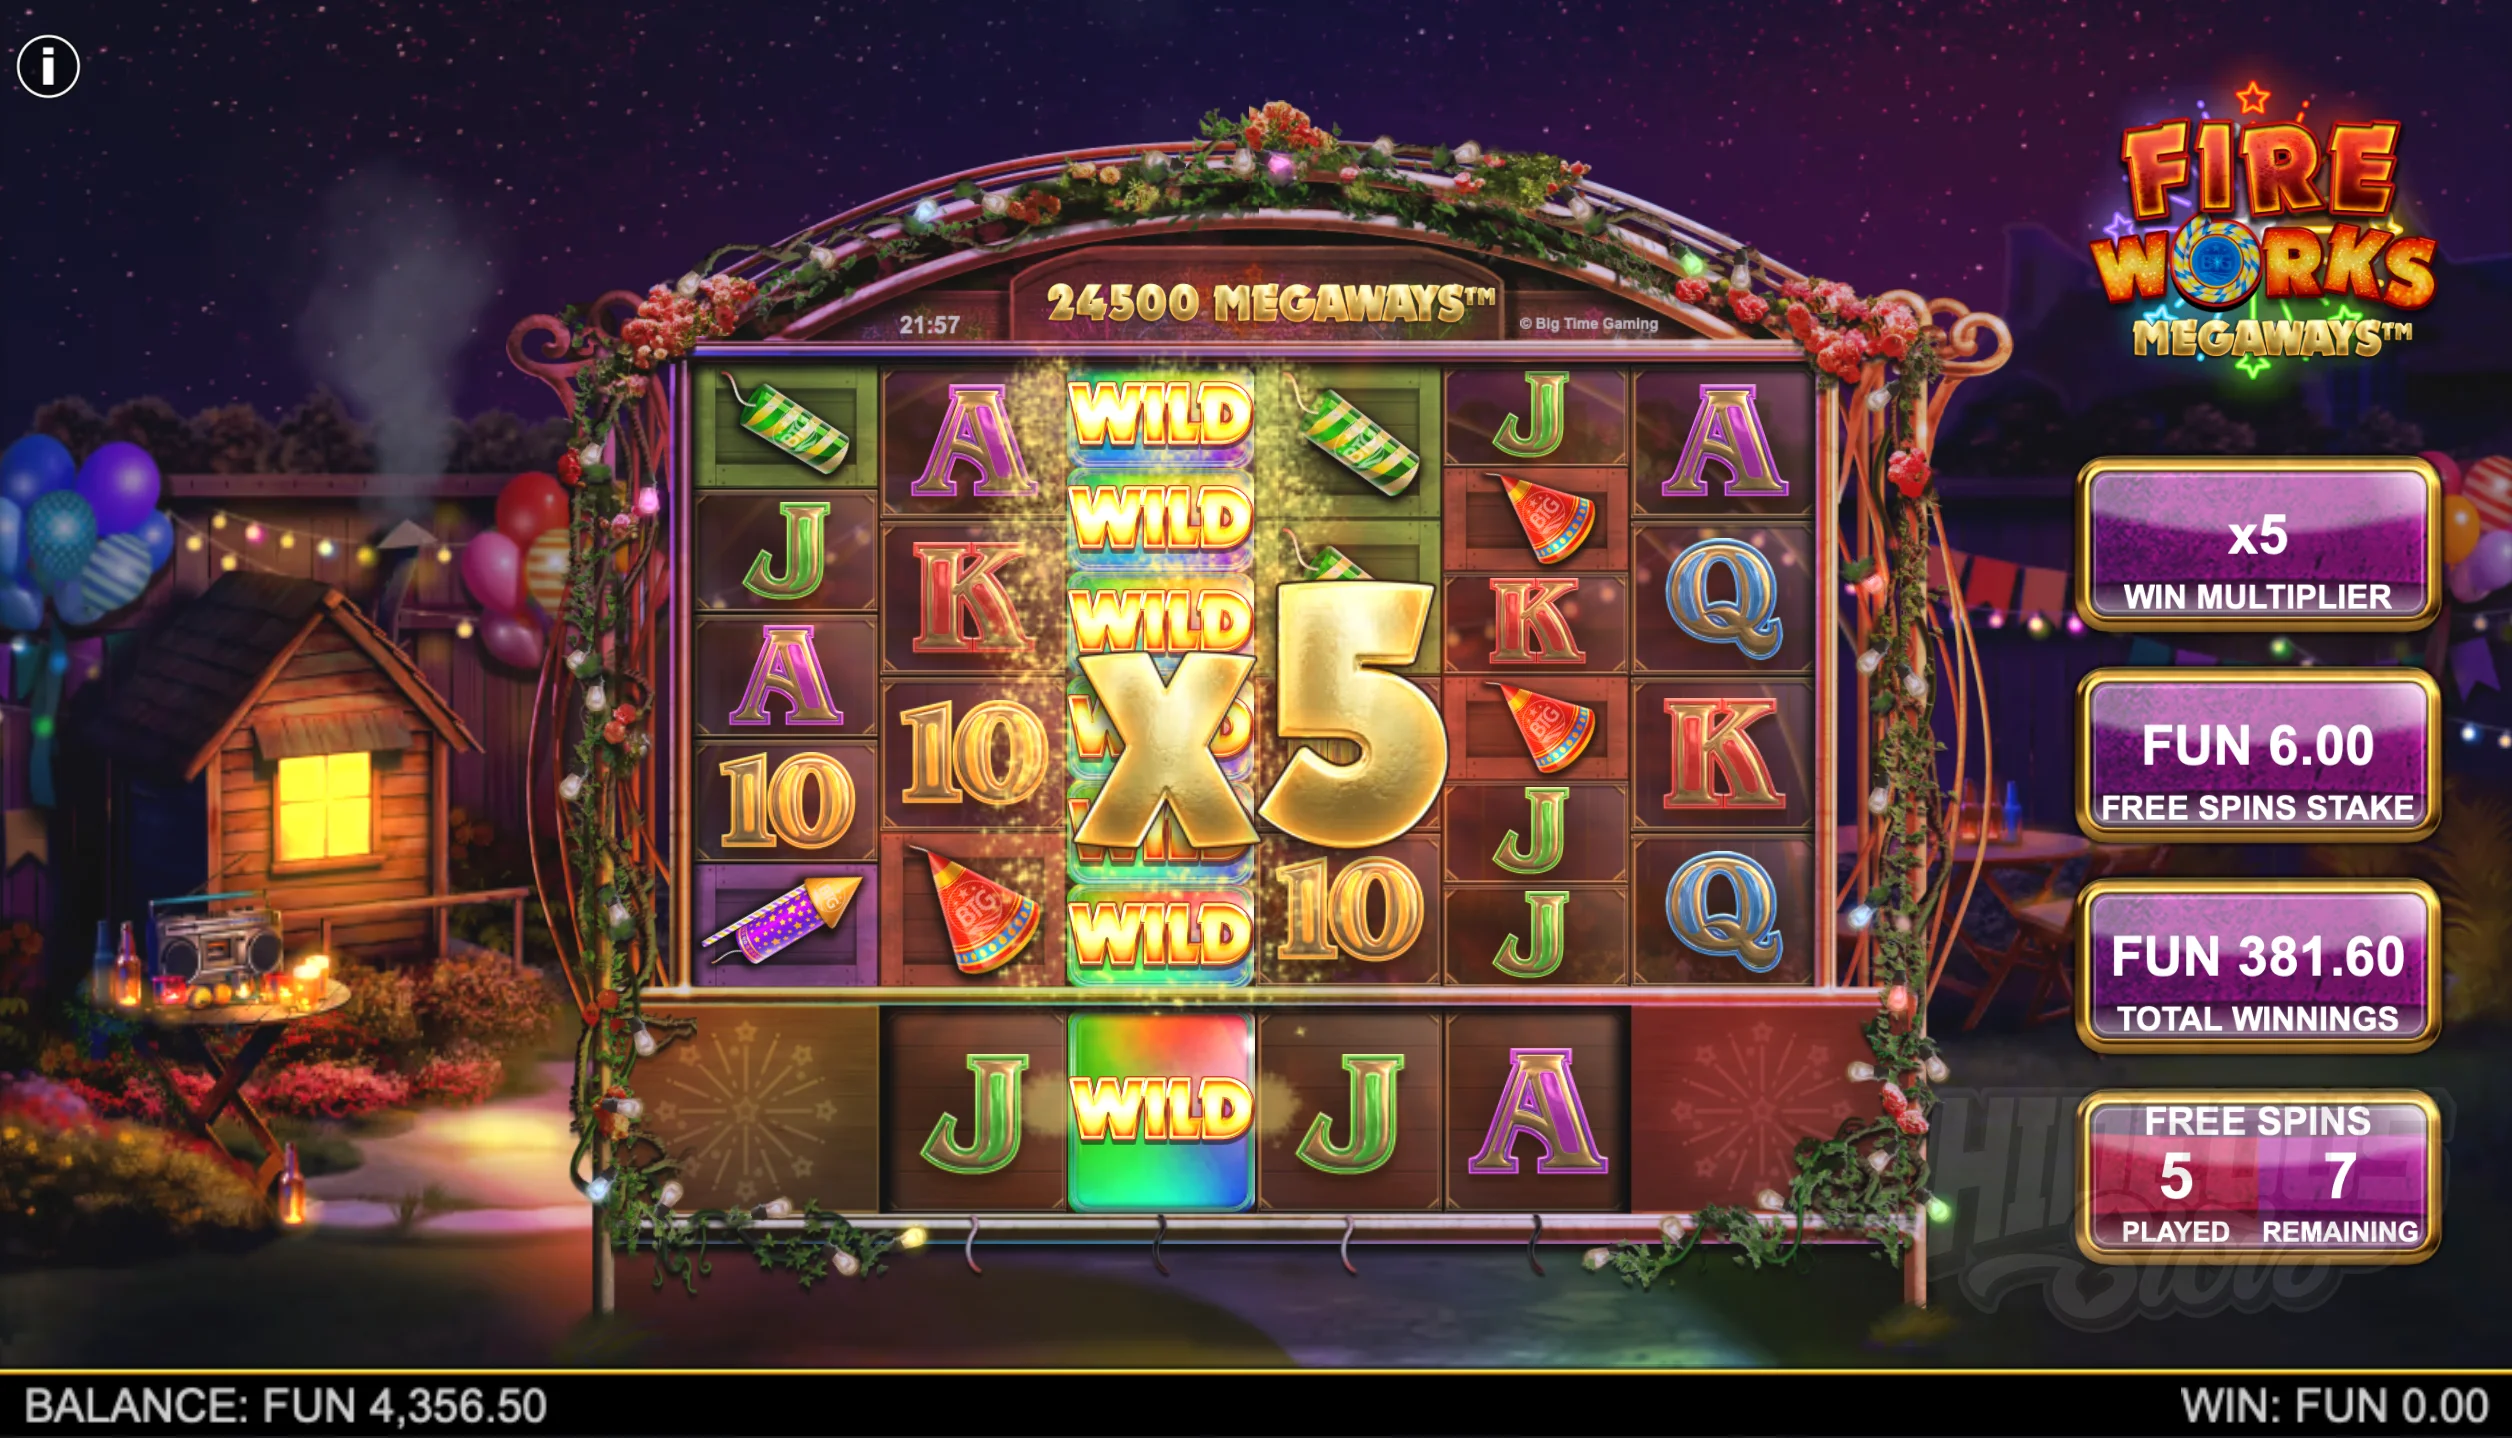 Each Time a Firework Wild Bonus is Triggered in Free Spins, the Win Multiplier Will Increase By +1